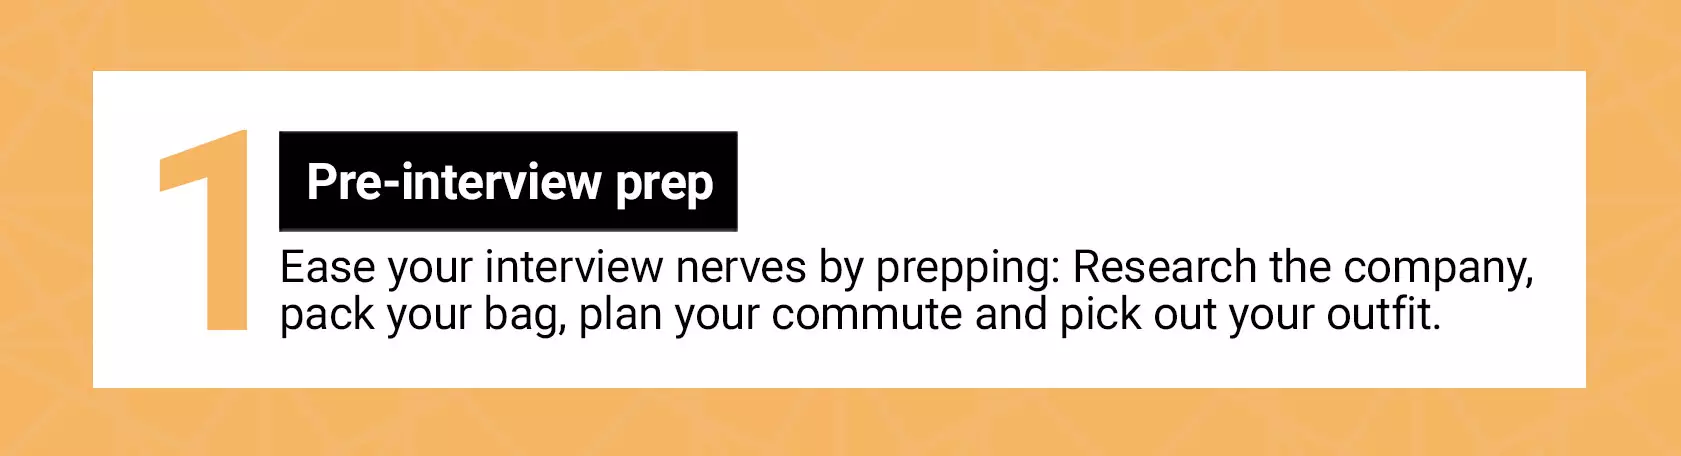 Pre-interview prep. Ease your interview nerves by prepping: Research the company, pack your bag, plan your commute and pick out your outfit.